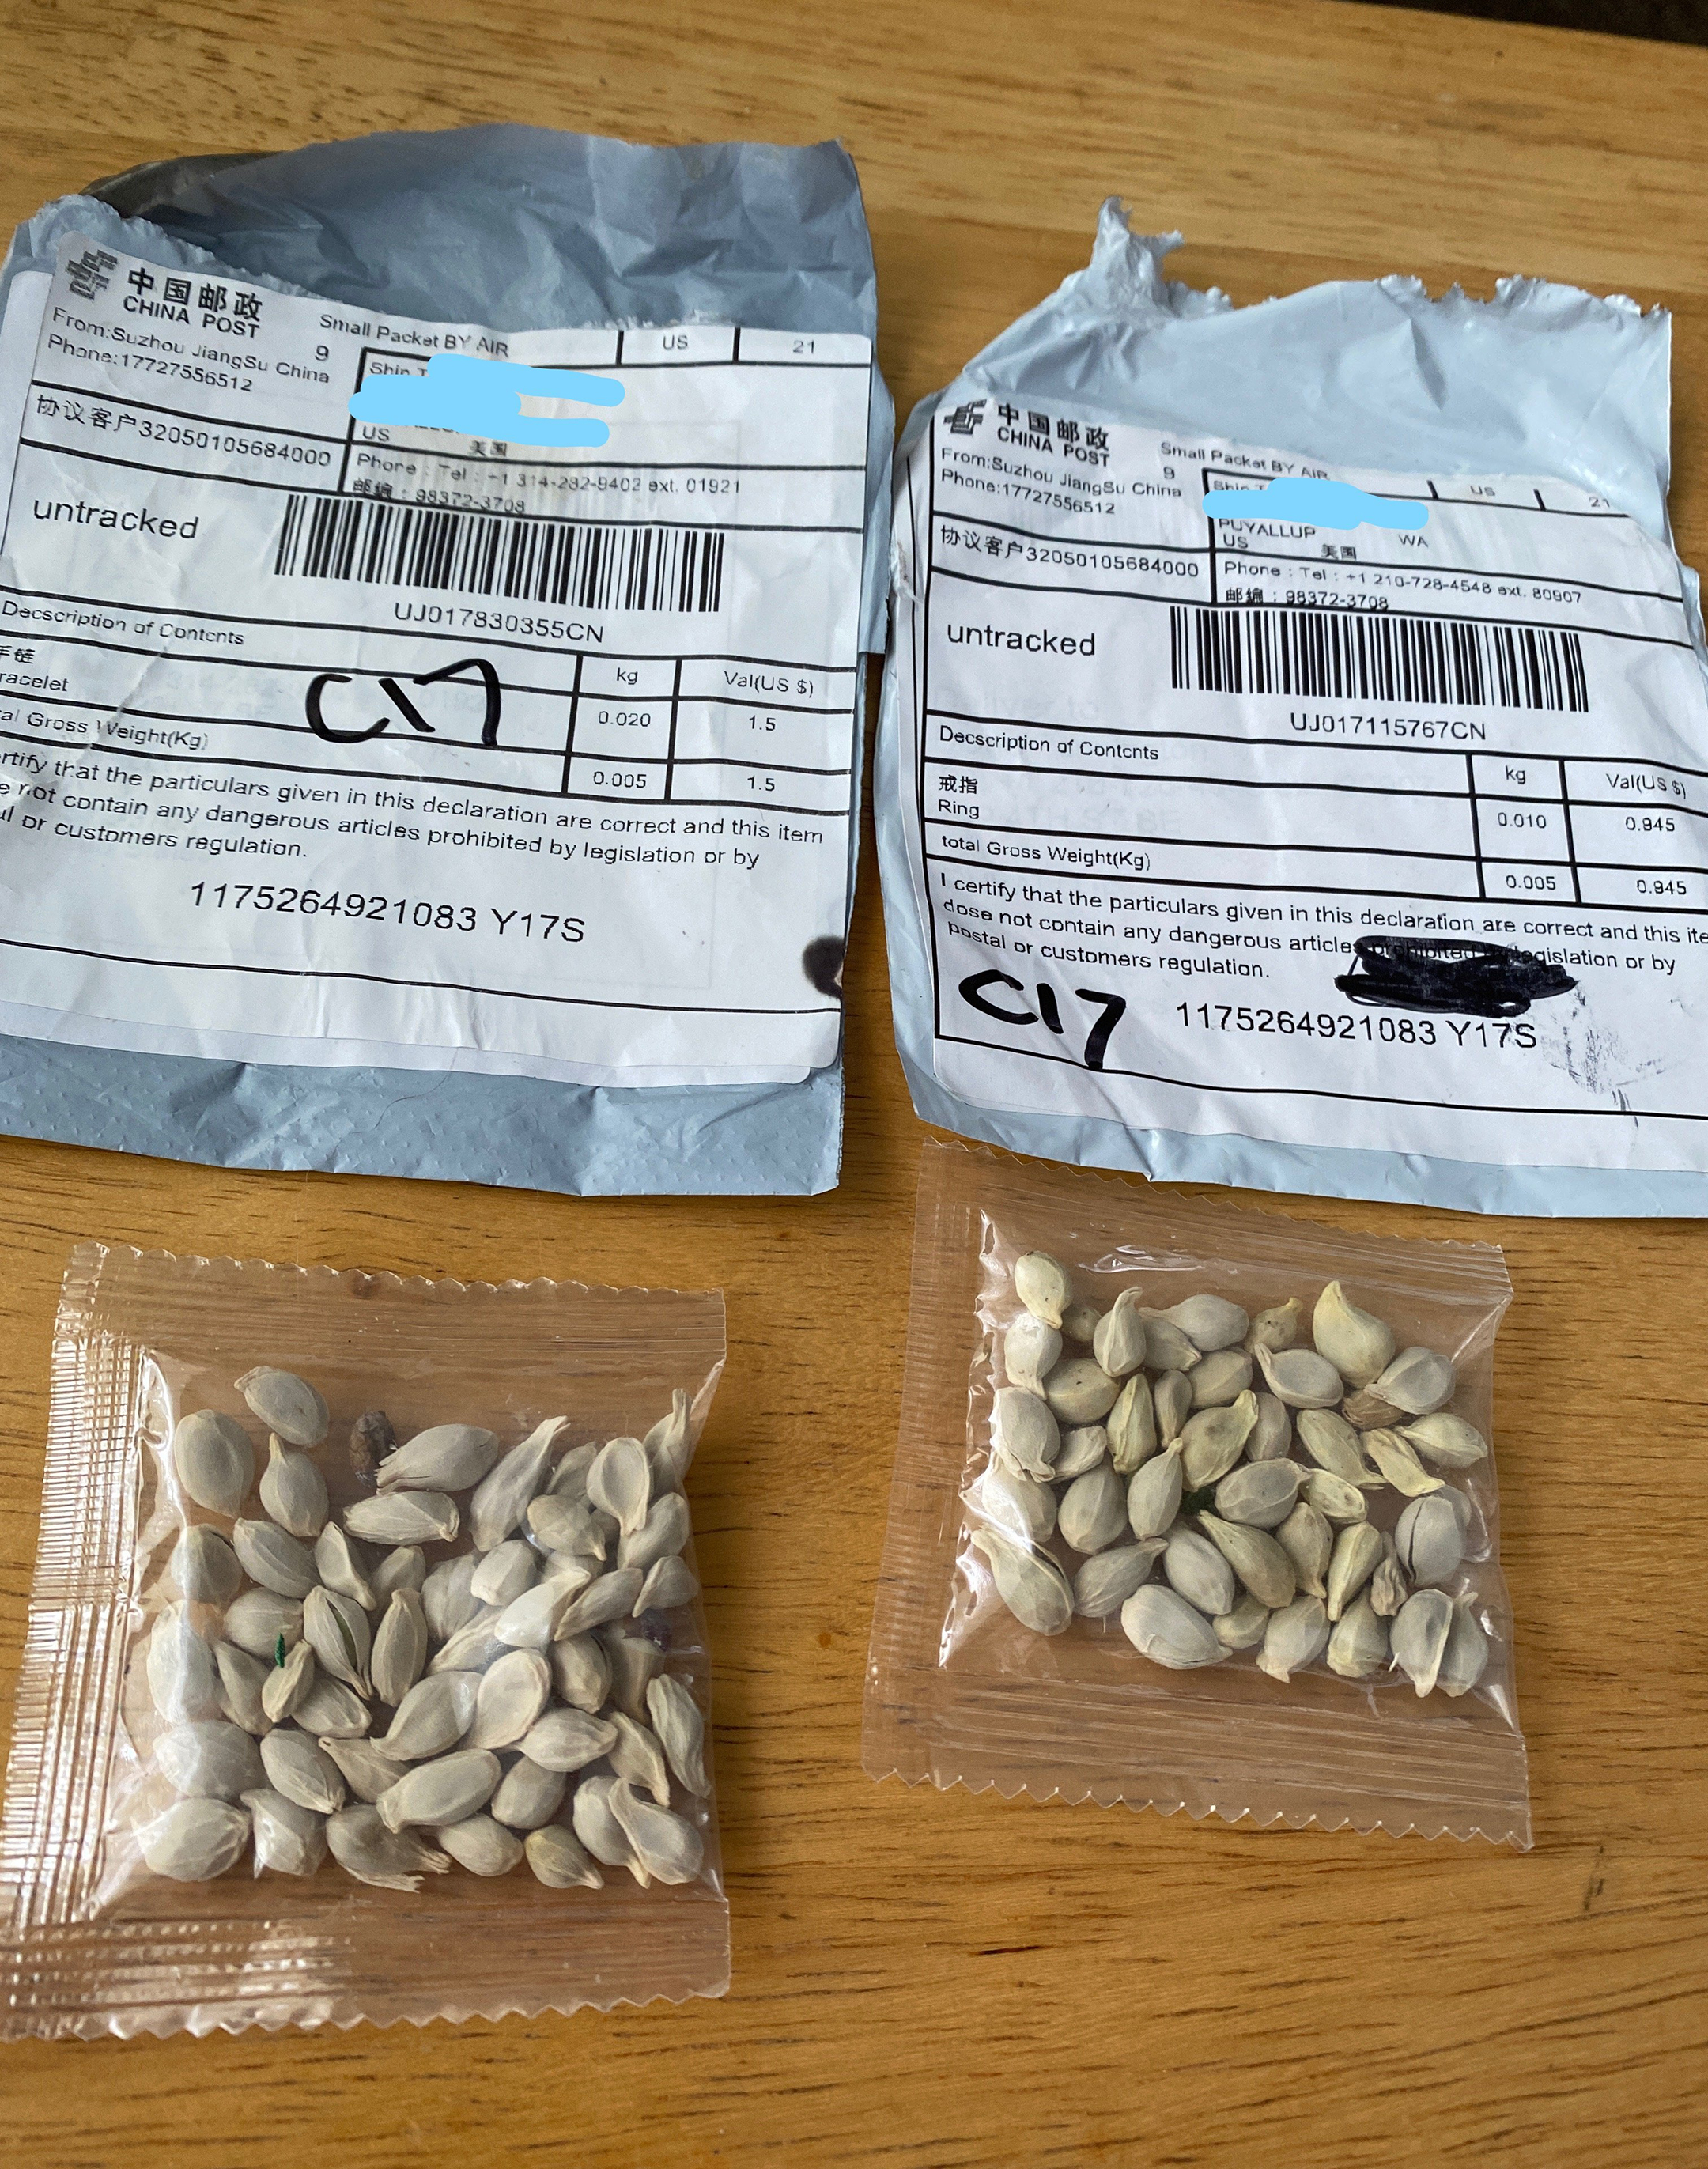 Two bags of seeds, sealed, above two open plastic mailing envelopes